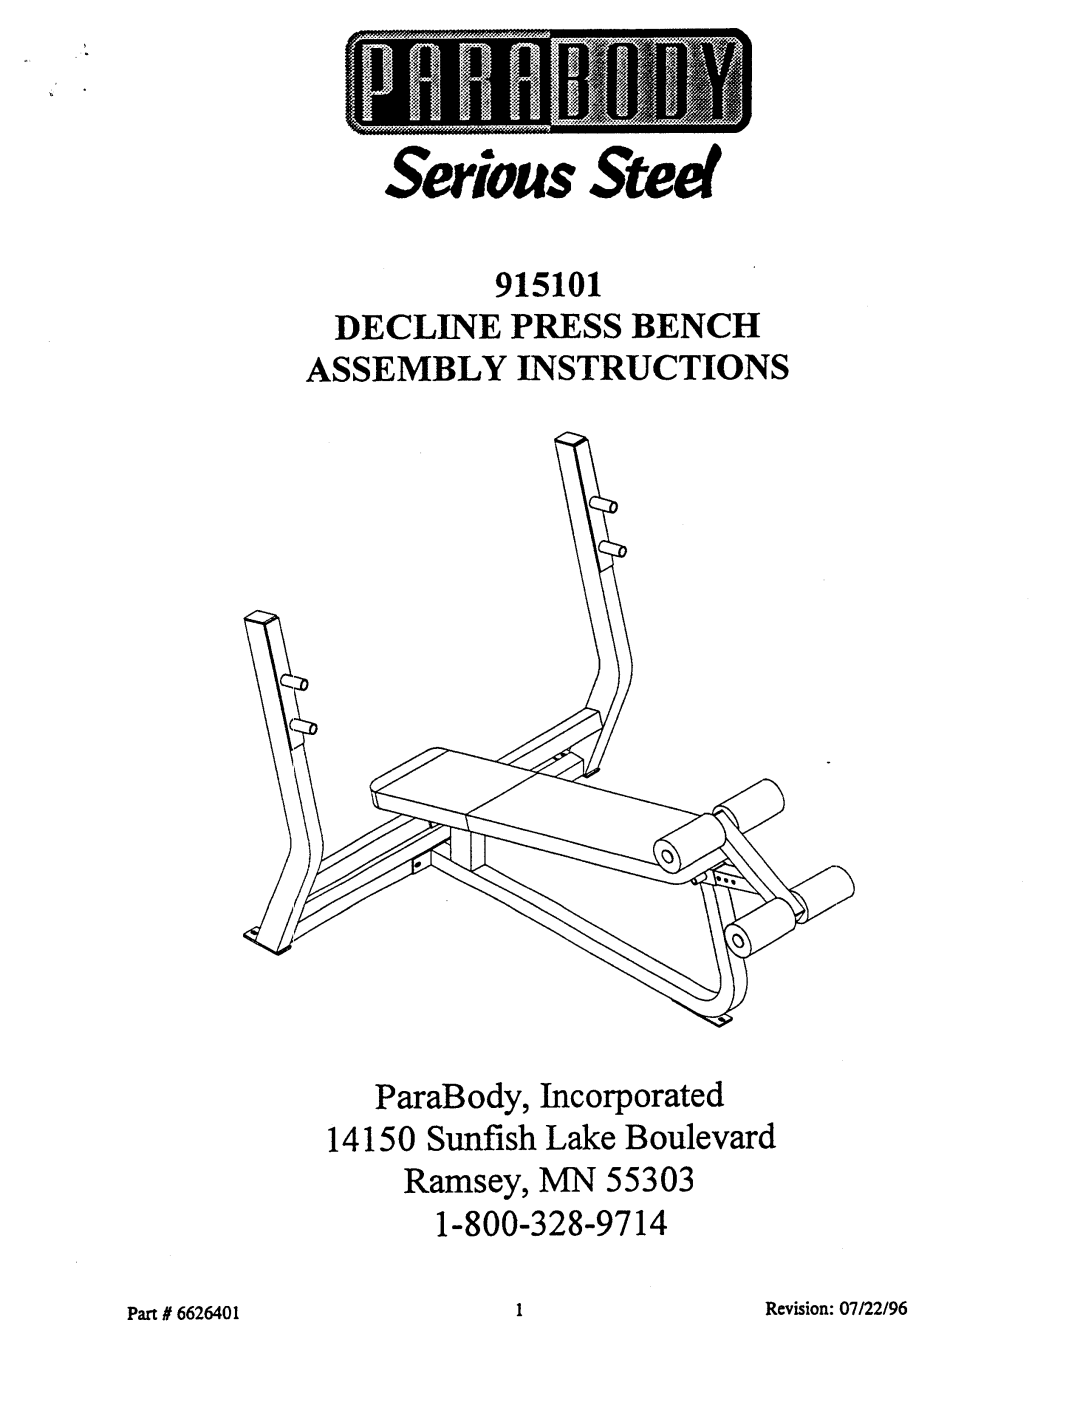 ParaBody 915101 manual SeriousSteel, Decline Press Bench Assembly Instructions 